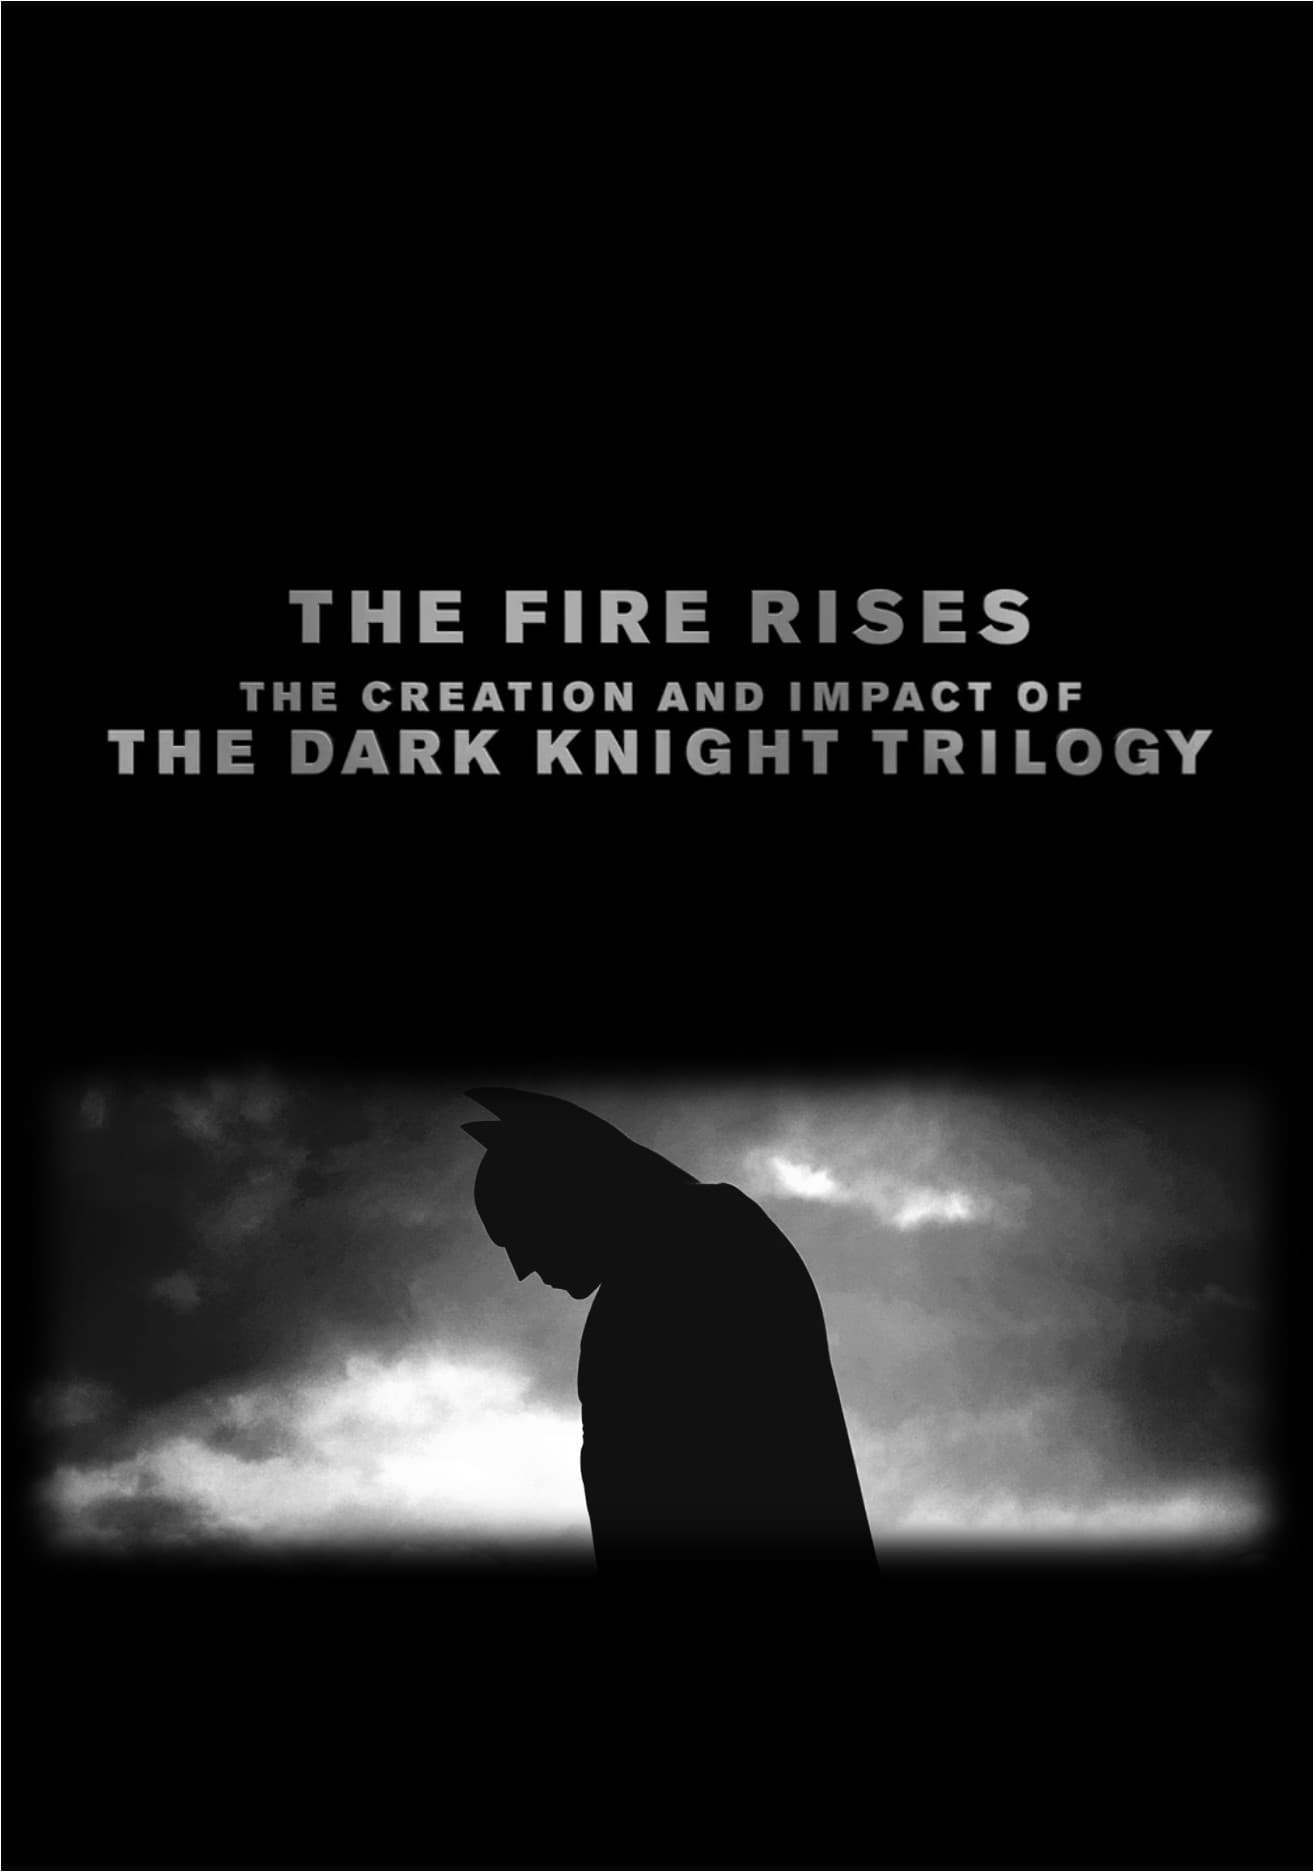 The Fire Rises: The Creation and Impact of The Dark Knight Trilogy (2013)